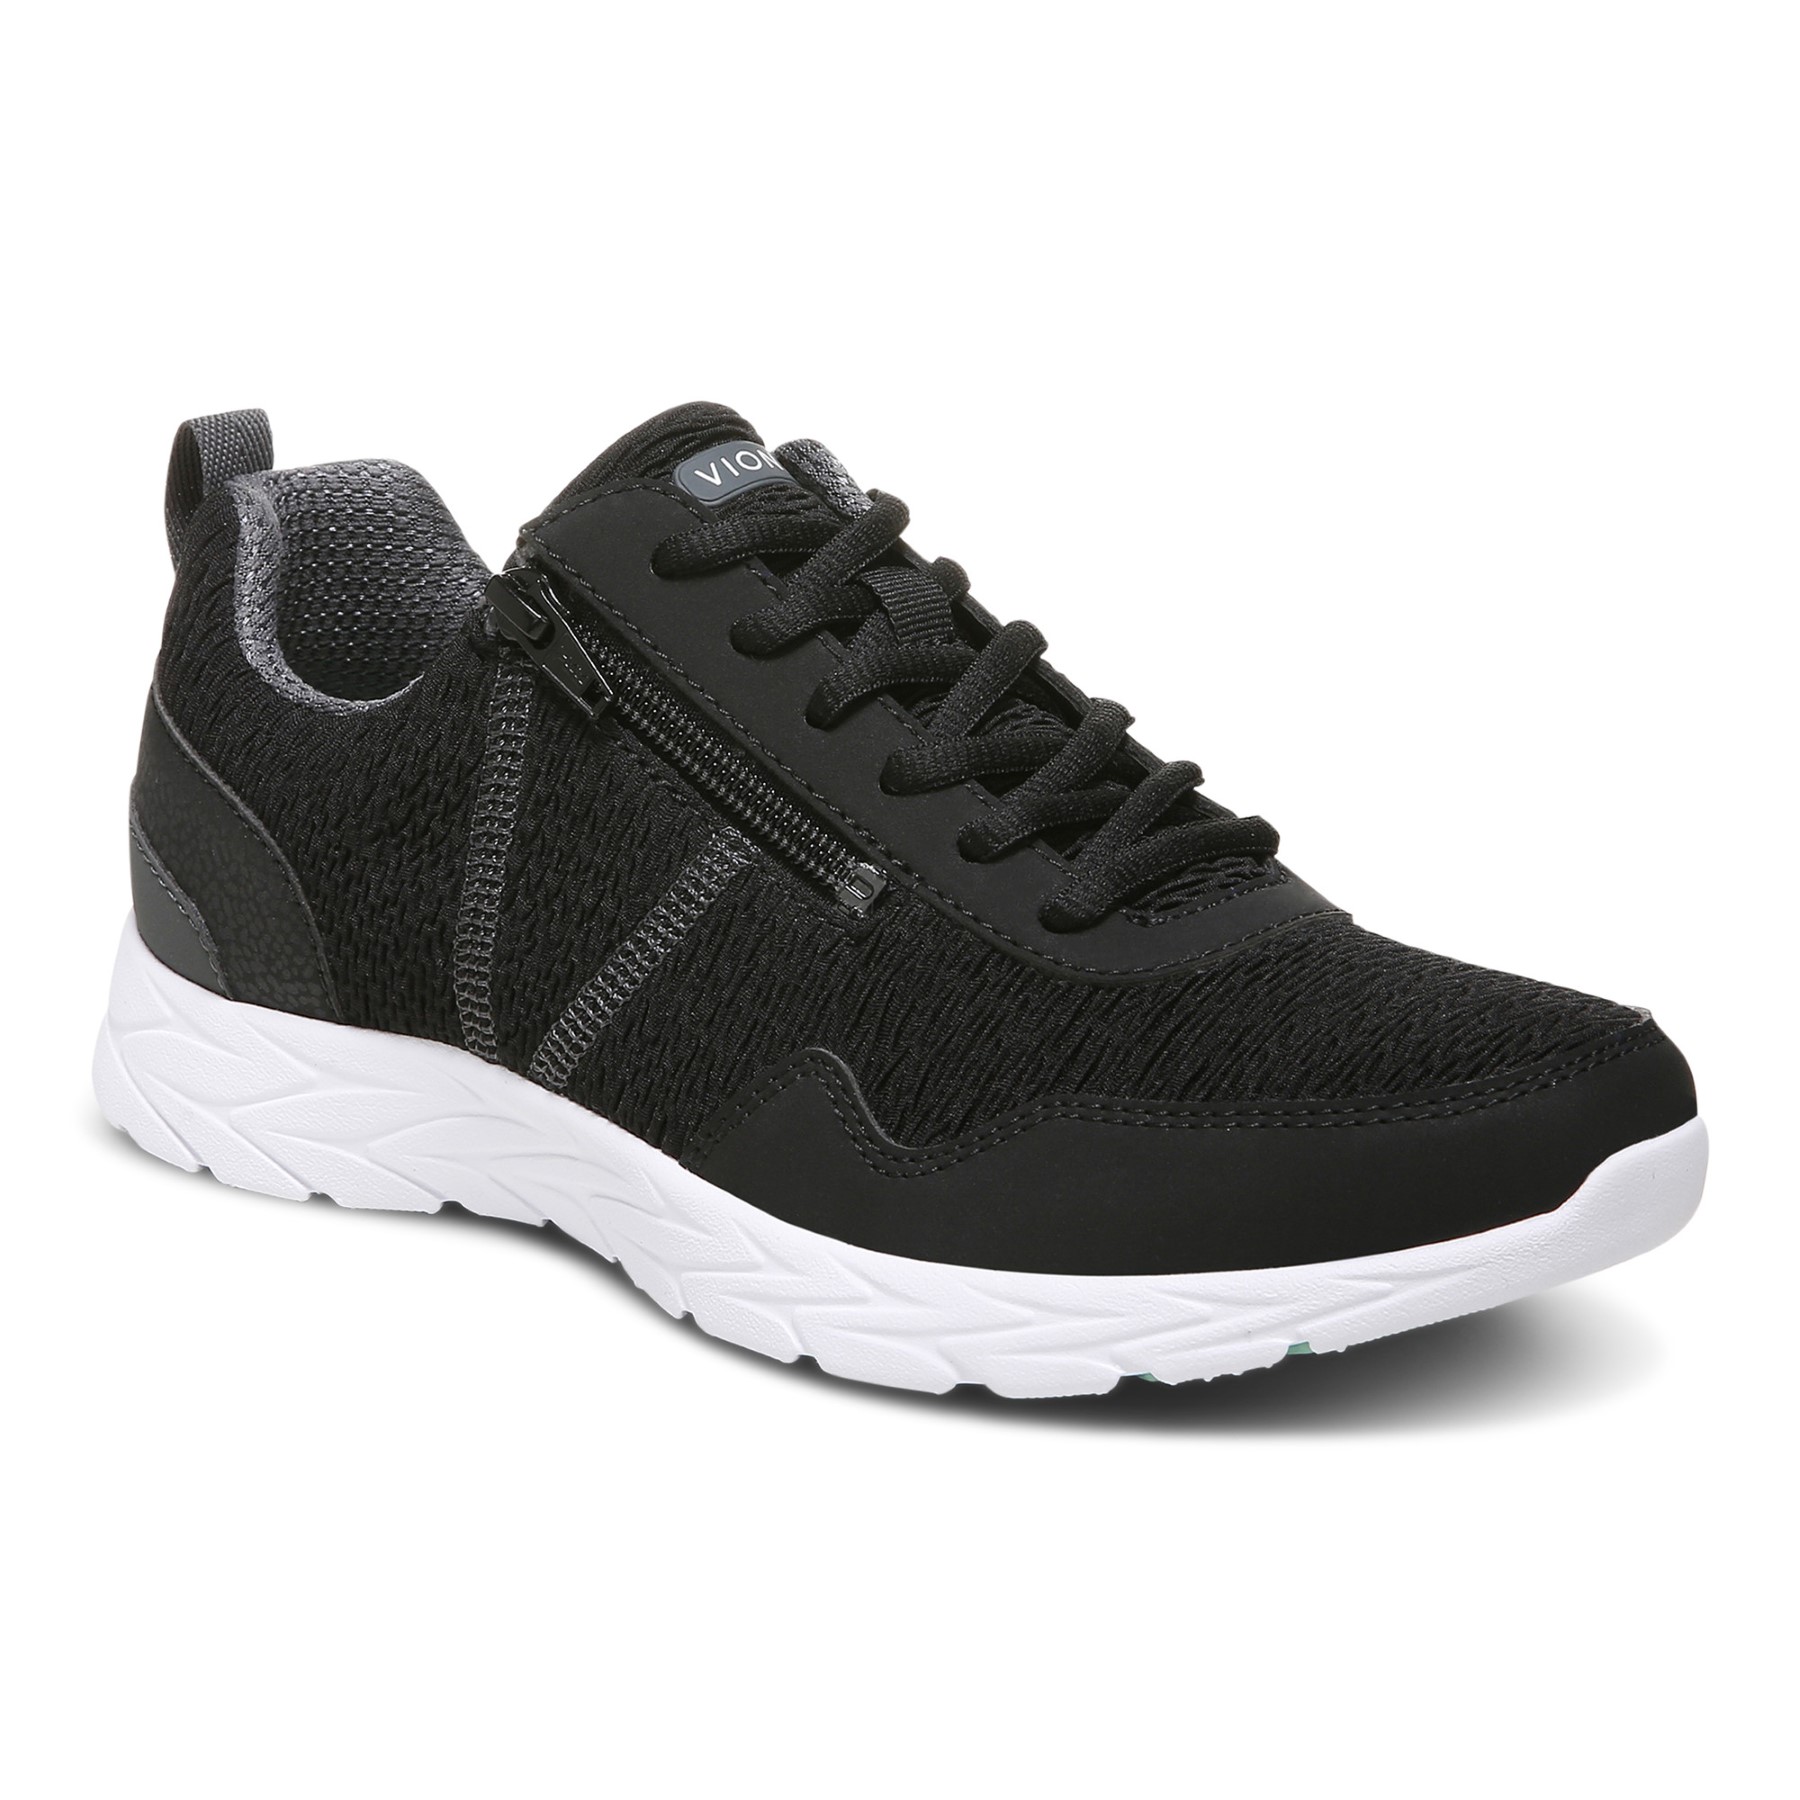 Vionic Jetta Women's Supportive Stability Athletic Sneaker - Free Shipping